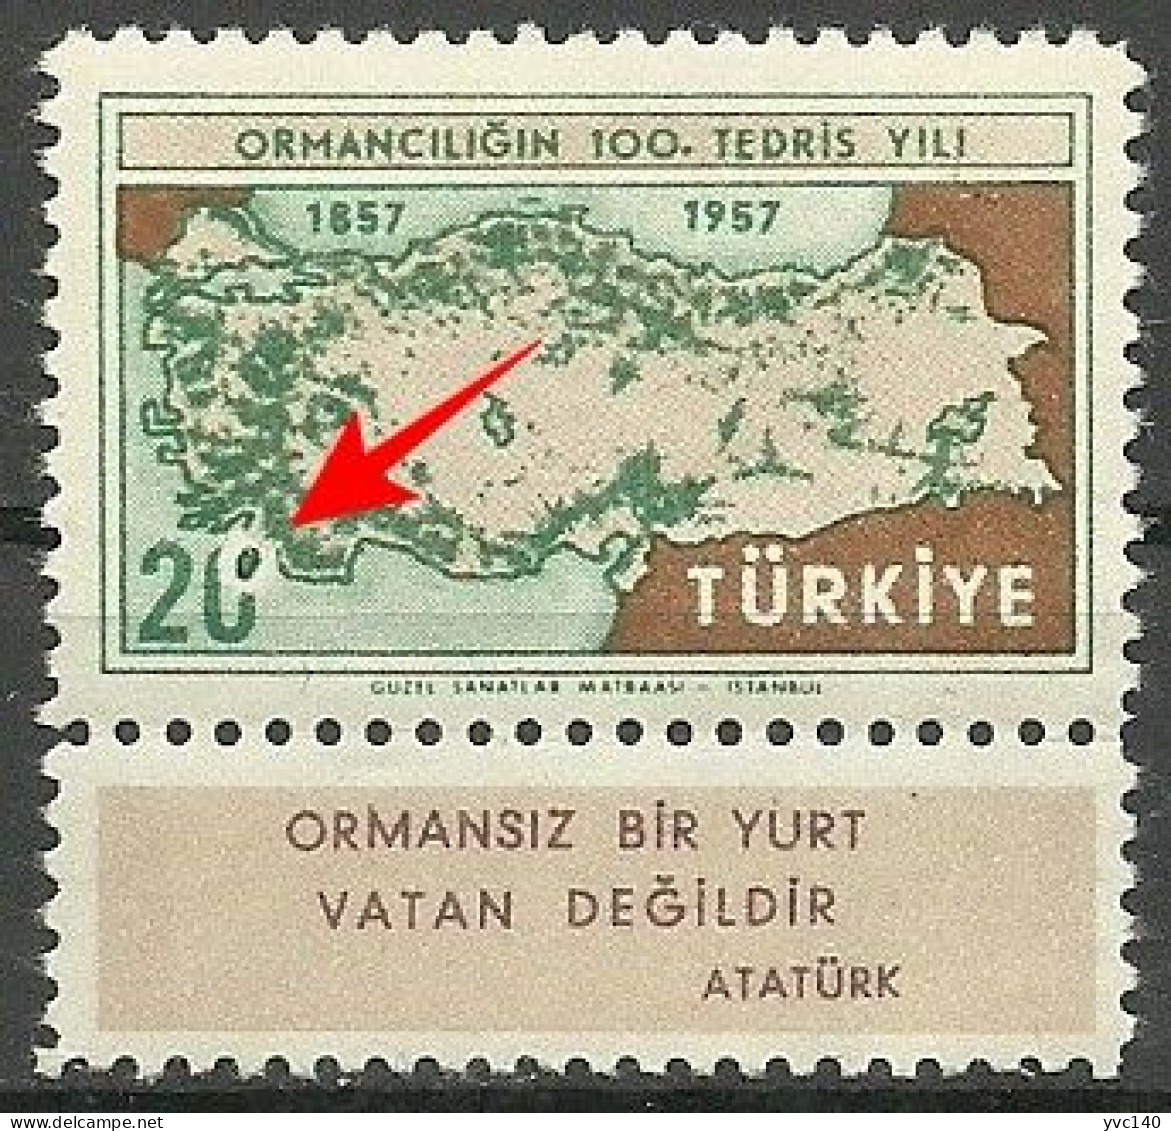 Turkey; 1957 Centenary Of The Instruction Of Forestry In Turkey ERROR "Printing Stain" - Unused Stamps